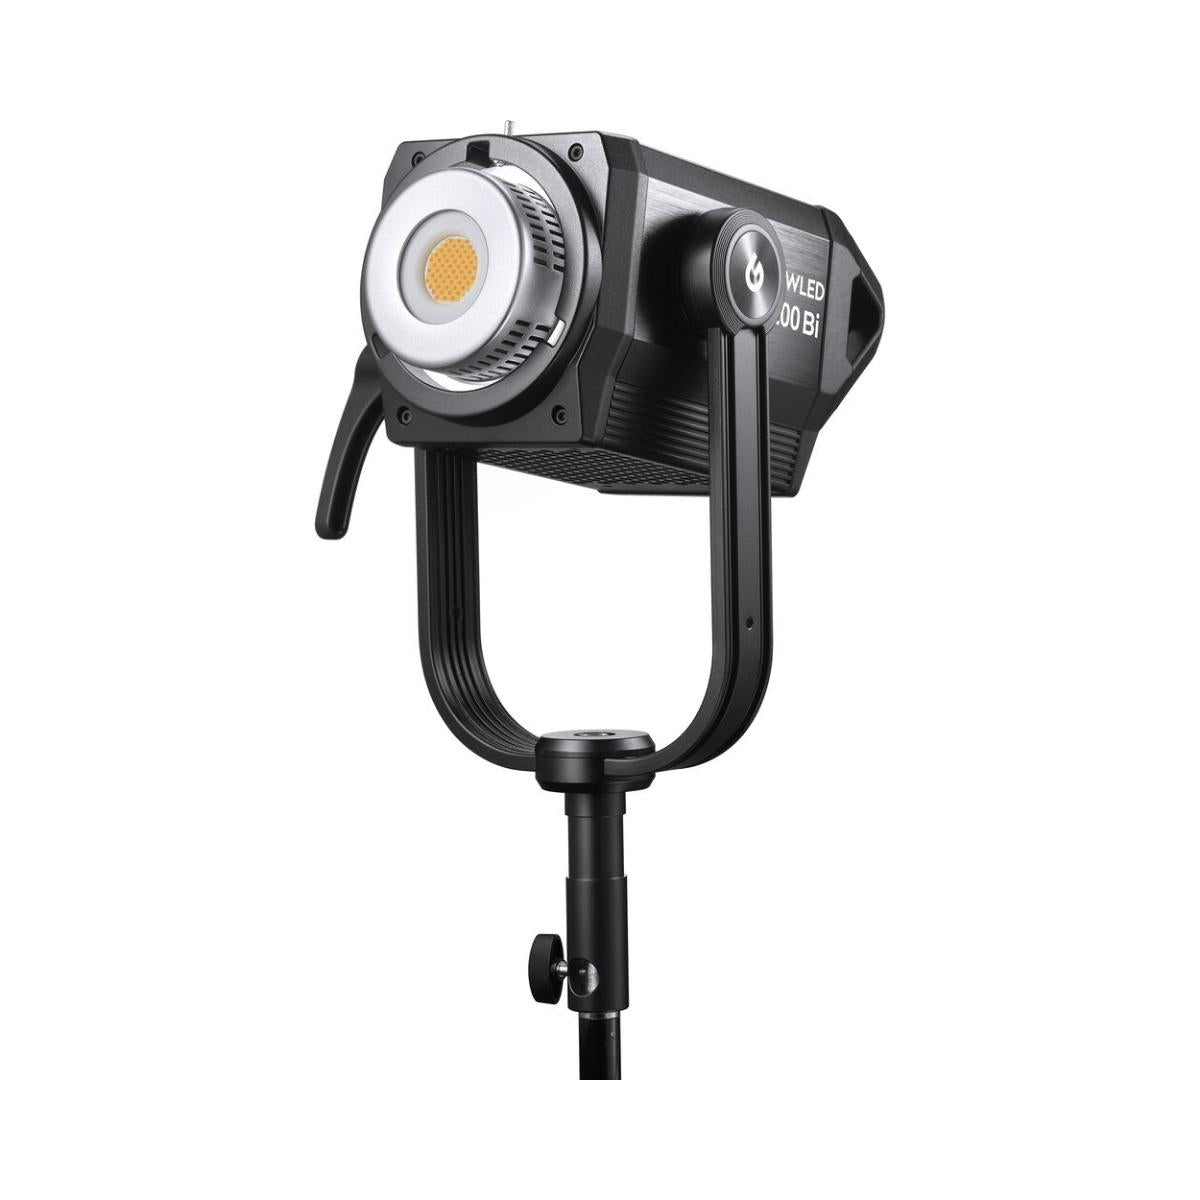 Godox KNOWLED 200W Daylight 5600K / Bi-Color 2800-6500K LED Light with Bluetooth 2.4GHz Wireless Control, Bowens-S Type Reflector Mount, 2x Built-In V-Mount Battery Plate - Photography & Video Studio Lighting | M200D M200BI